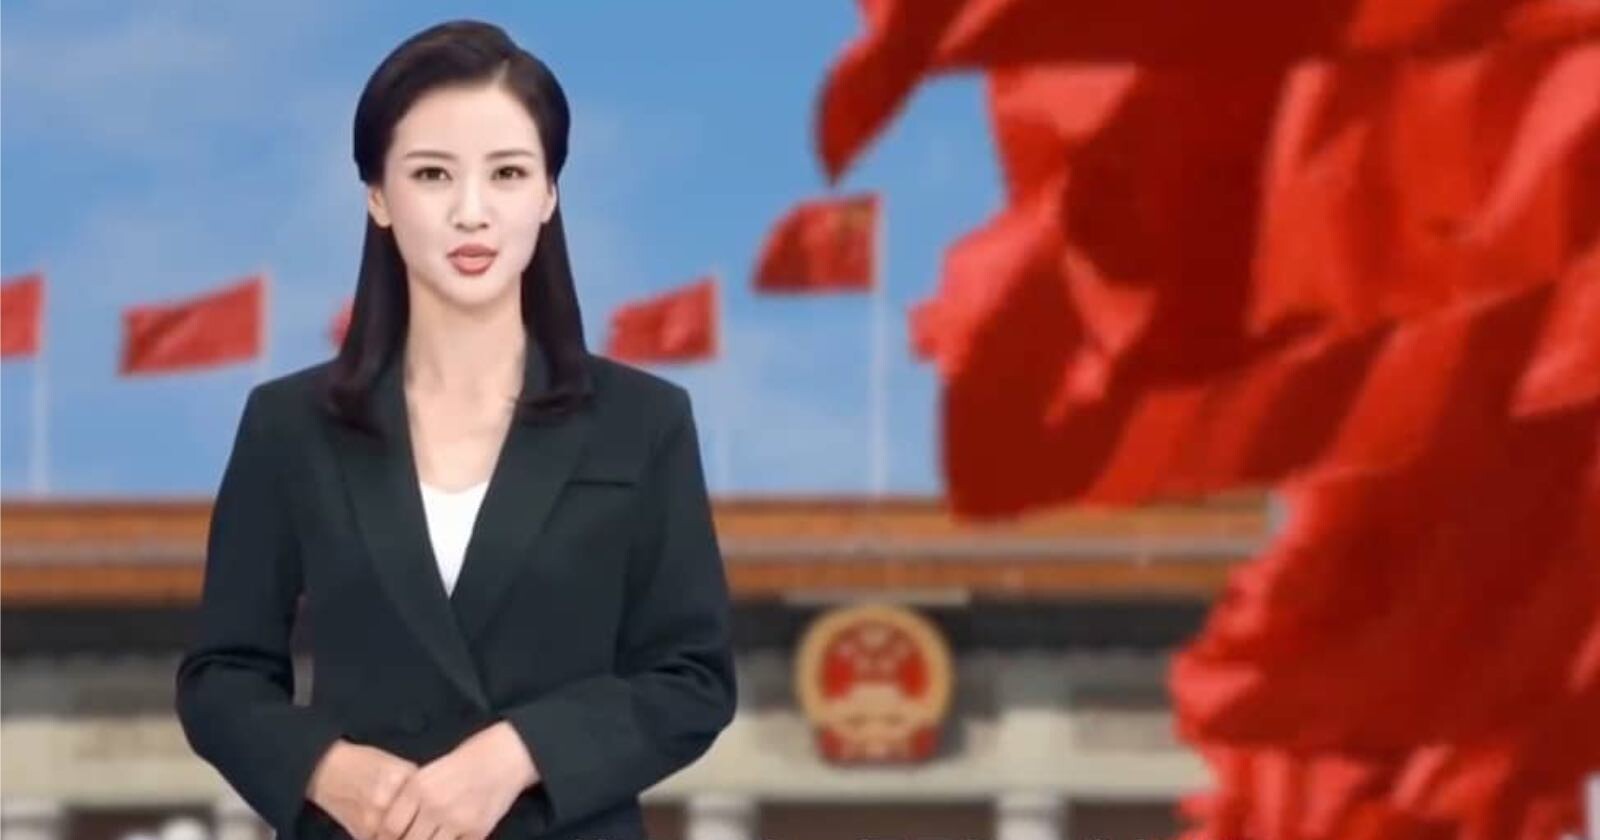 Chinese AI News Anchor Works 24 Hours a Day, 365 Days a Year